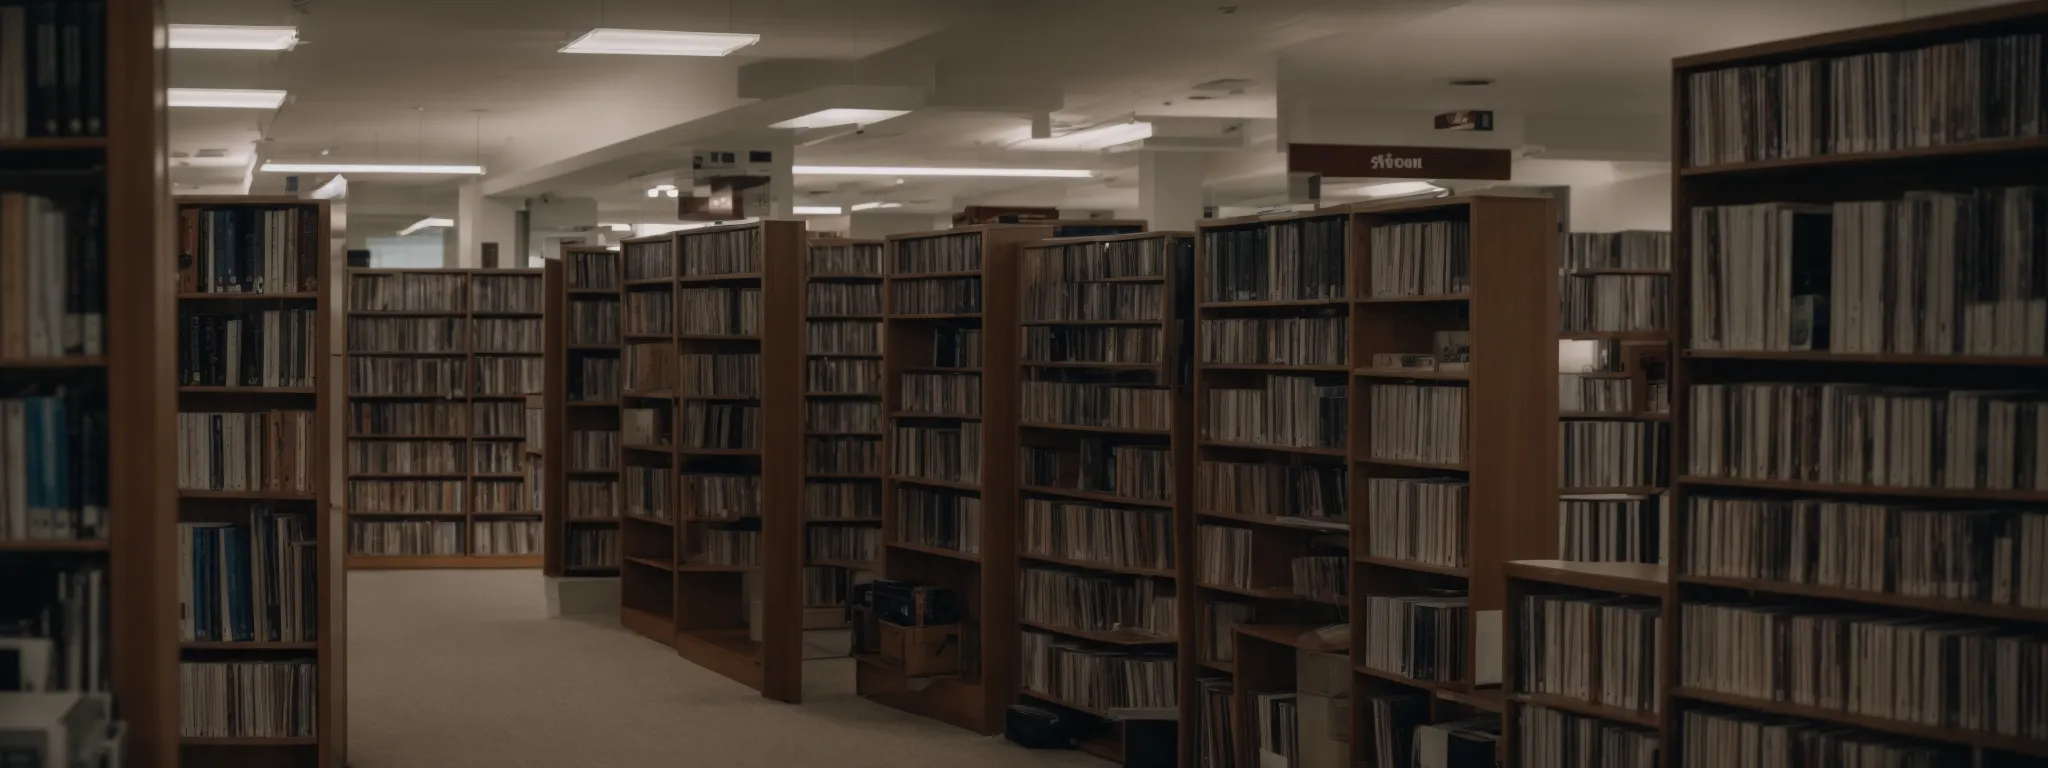 a library with neatly arranged shelves of multimedia resources like film reels, cds, and photo albums, symbolizing an organized digital asset management system.